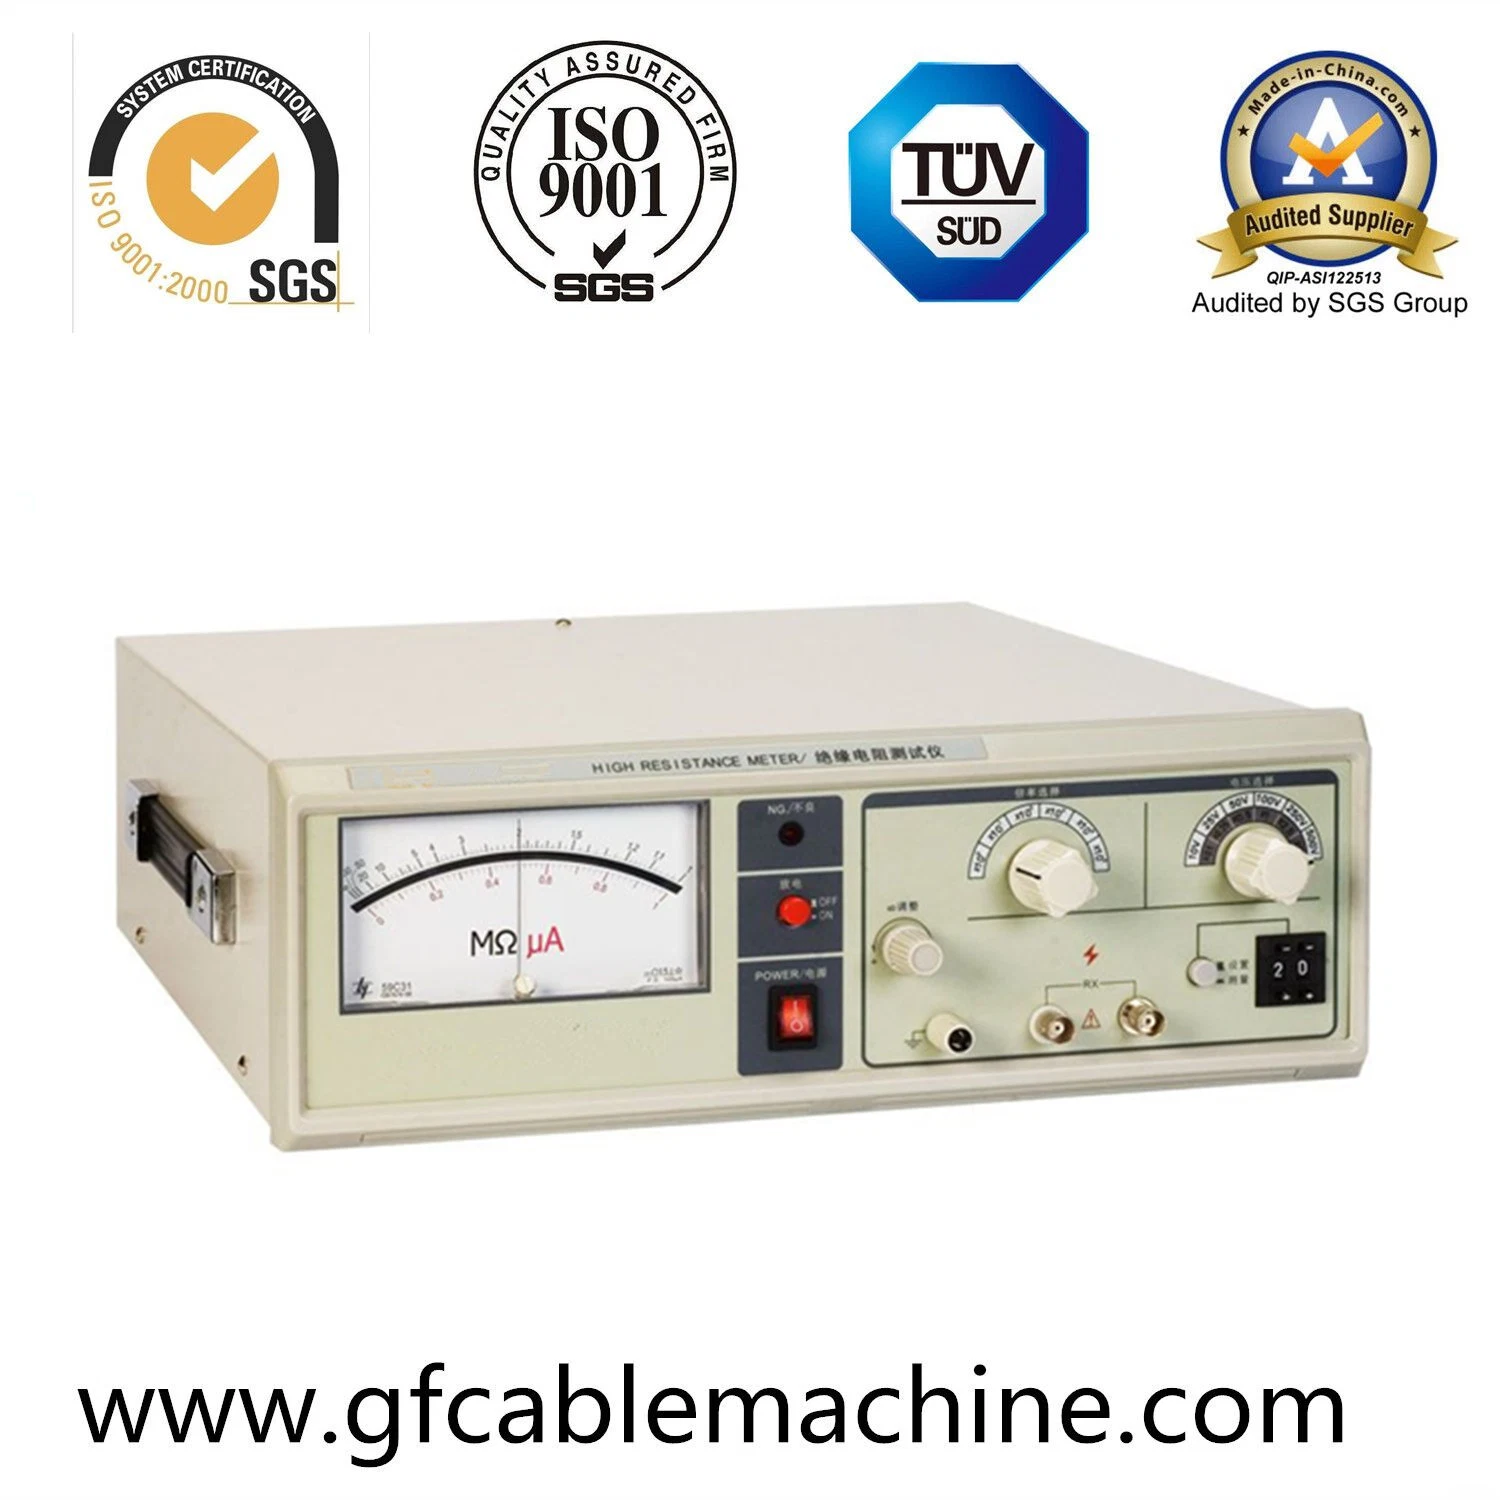 Cable Test Equipment/Insulation Resistance Tester High Resistance Meter